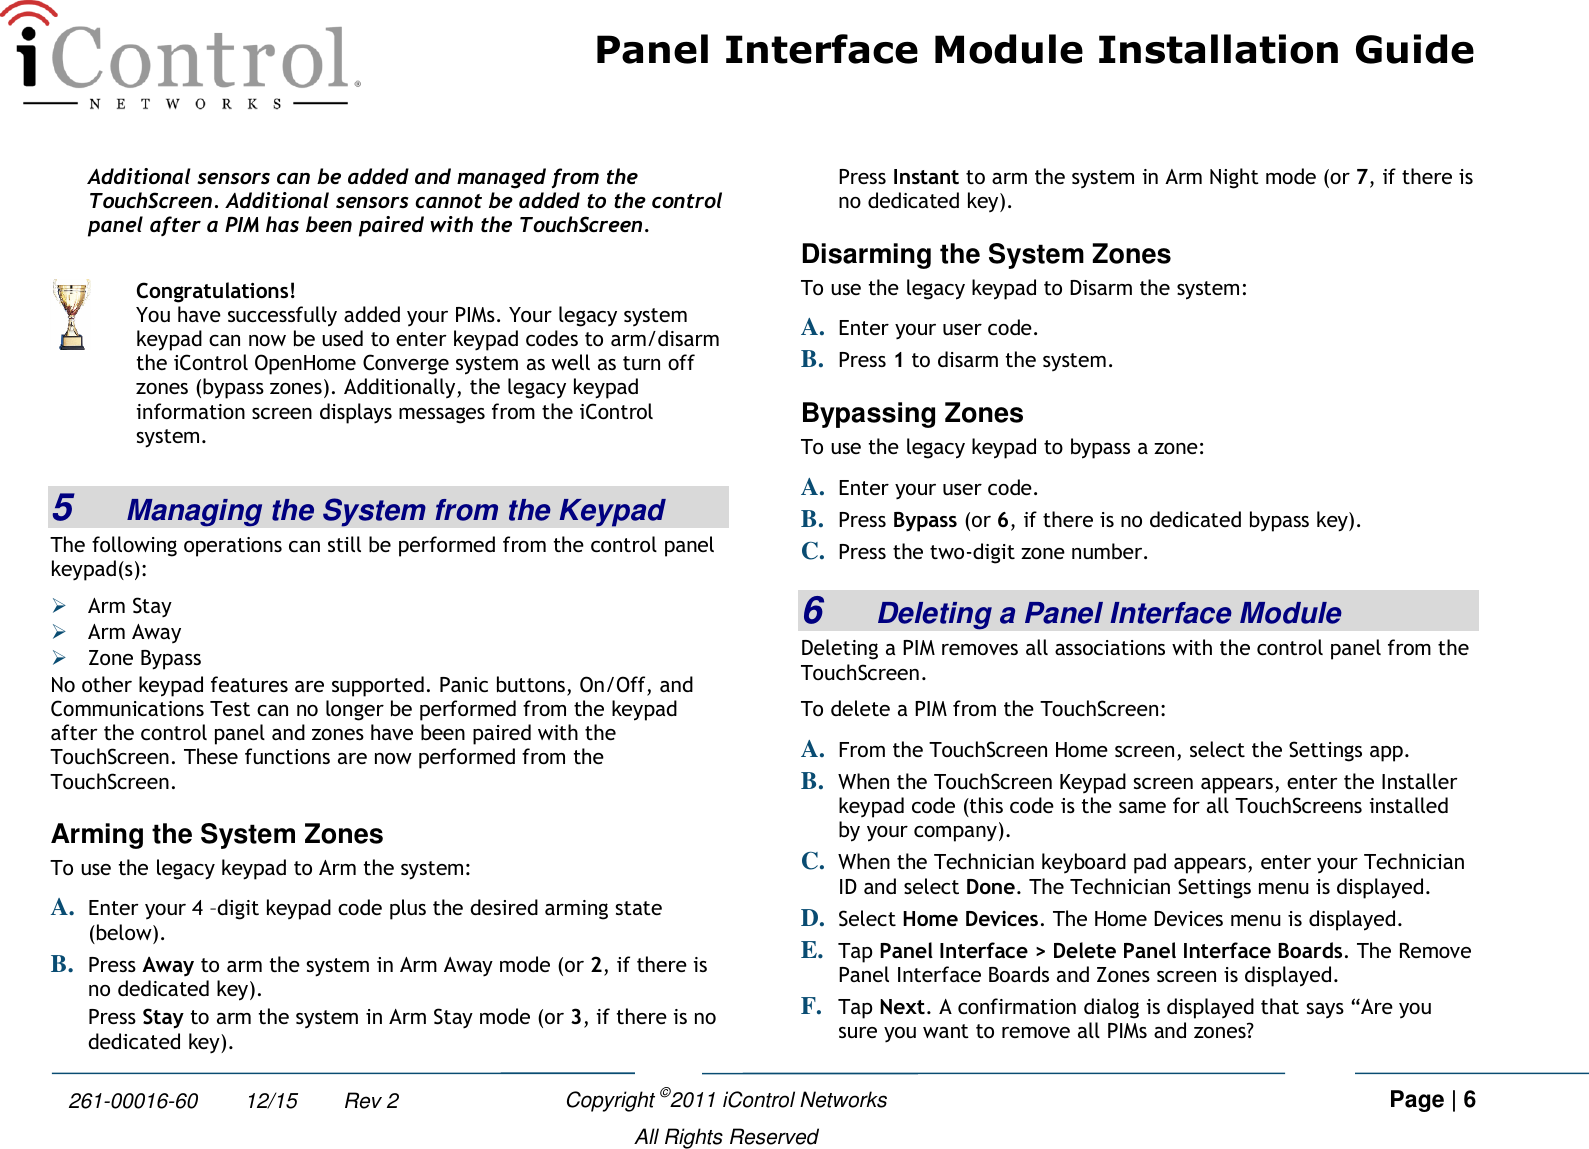 Panel Interface Module Installation Guide    Copyright ©2011 iControl Networks   Page | 6  All Rights Reserved 261-00016-60        12/15        Rev 2 Additional sensors can be added and managed from the TouchScreen. Additional sensors cannot be added to the control panel after a PIM has been paired with the TouchScreen. 5  Managing the System from the Keypad The following operations can still be performed from the control panel keypad(s):  Arm Stay   Arm Away  Zone Bypass No other keypad features are supported. Panic buttons, On/Off, and Communications Test can no longer be performed from the keypad after the control panel and zones have been paired with the TouchScreen. These functions are now performed from the TouchScreen. Arming the System Zones To use the legacy keypad to Arm the system: A. Enter your 4 –digit keypad code plus the desired arming state (below). B. Press Away to arm the system in Arm Away mode (or 2, if there is no dedicated key). Press Stay to arm the system in Arm Stay mode (or 3, if there is no dedicated key). Press Instant to arm the system in Arm Night mode (or 7, if there is no dedicated key). Disarming the System Zones To use the legacy keypad to Disarm the system: A. Enter your user code. B. Press 1 to disarm the system. Bypassing Zones To use the legacy keypad to bypass a zone: A. Enter your user code. B. Press Bypass (or 6, if there is no dedicated bypass key). C. Press the two-digit zone number. 6  Deleting a Panel Interface Module Deleting a PIM removes all associations with the control panel from the TouchScreen.  To delete a PIM from the TouchScreen:  A. From the TouchScreen Home screen, select the Settings app. B. When the TouchScreen Keypad screen appears, enter the Installer keypad code (this code is the same for all TouchScreens installed by your company). C. When the Technician keyboard pad appears, enter your Technician ID and select Done. The Technician Settings menu is displayed. D. Select Home Devices. The Home Devices menu is displayed. E. Tap Panel Interface &gt; Delete Panel Interface Boards. The Remove Panel Interface Boards and Zones screen is displayed. F. Tap Next. A confirmation dialog is displayed that says “Are you sure you want to remove all PIMs and zones?   Congratulations! You have successfully added your PIMs. Your legacy system keypad can now be used to enter keypad codes to arm/disarm the iControl OpenHome Converge system as well as turn off zones (bypass zones). Additionally, the legacy keypad information screen displays messages from the iControl system. 